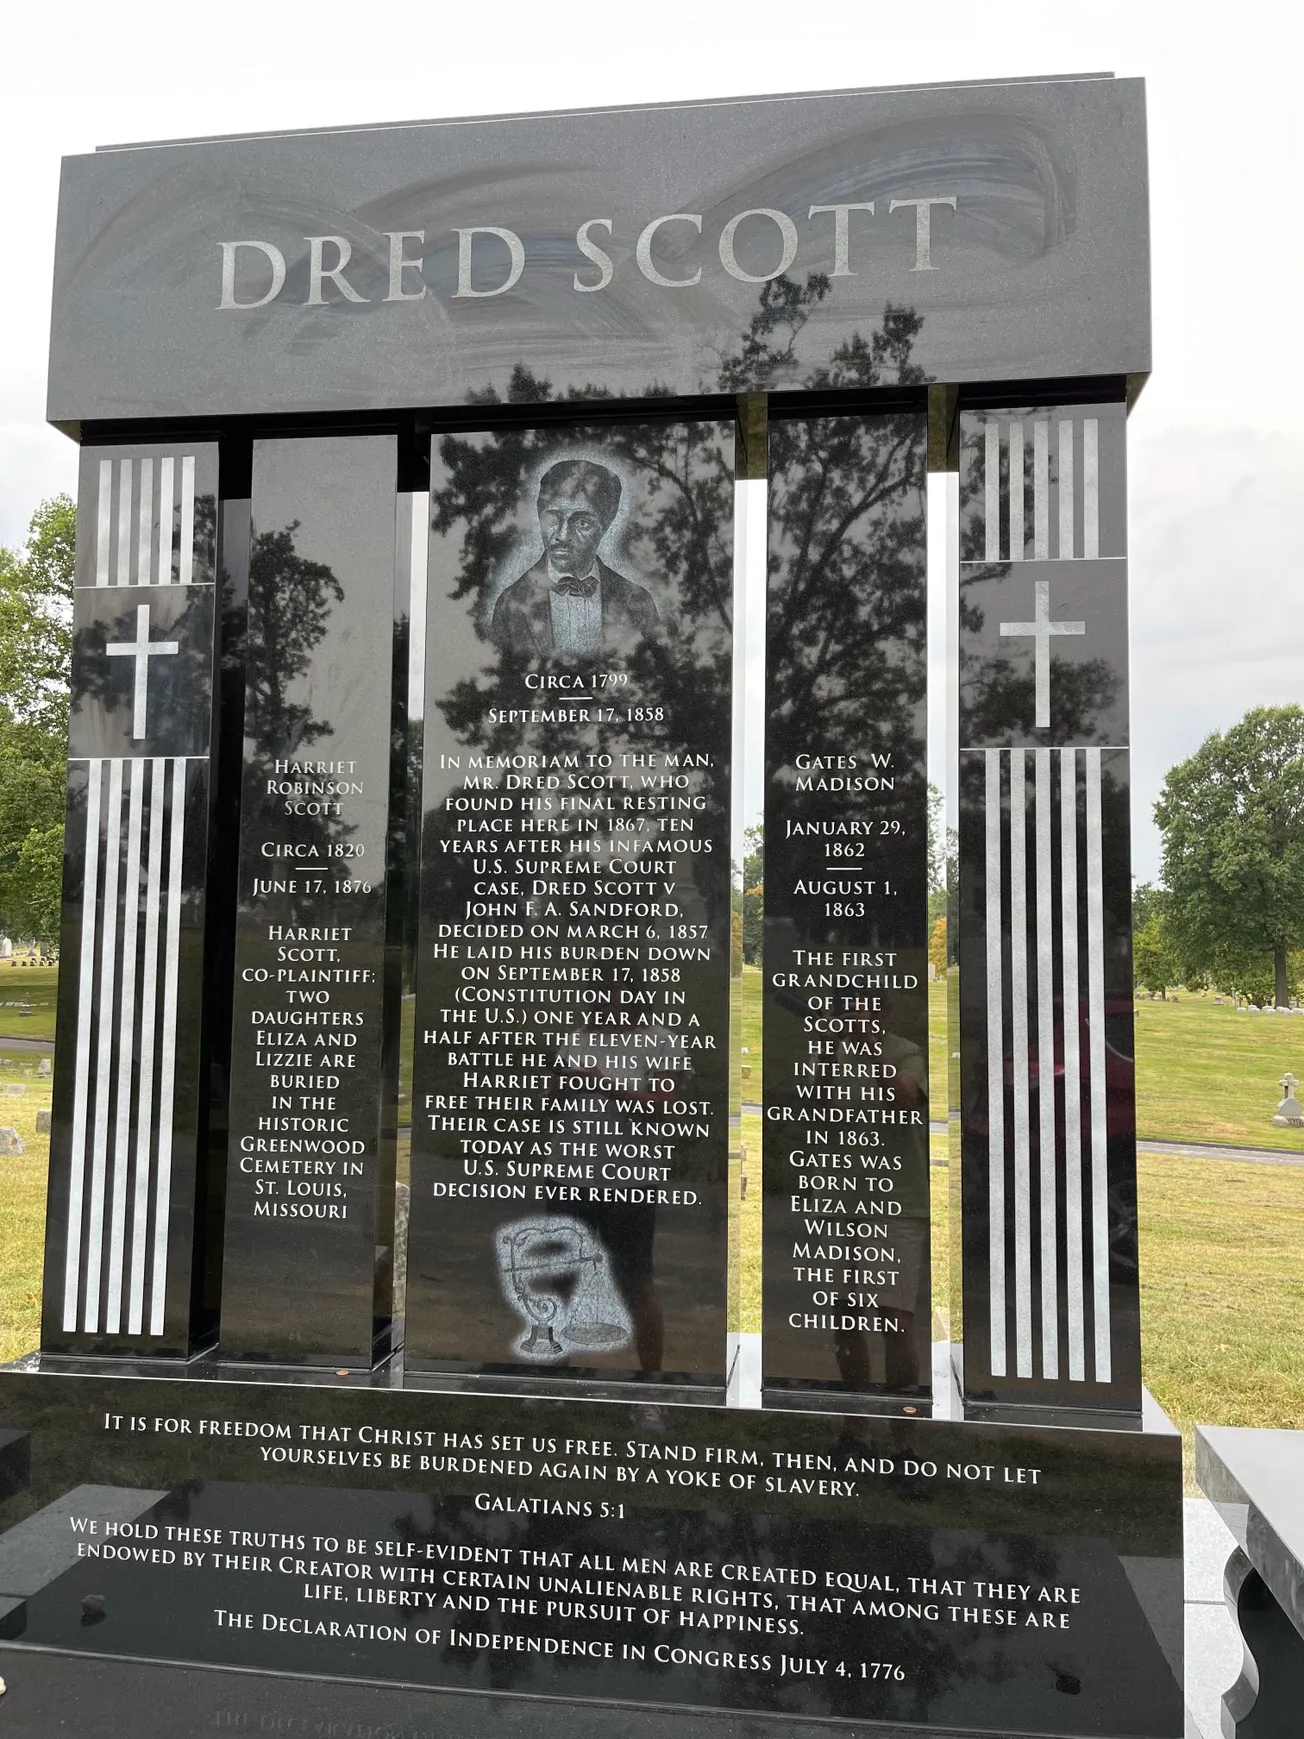 Dred Scott grave marker to be dedicated Saturday at Catholic cemetery in St. Louis